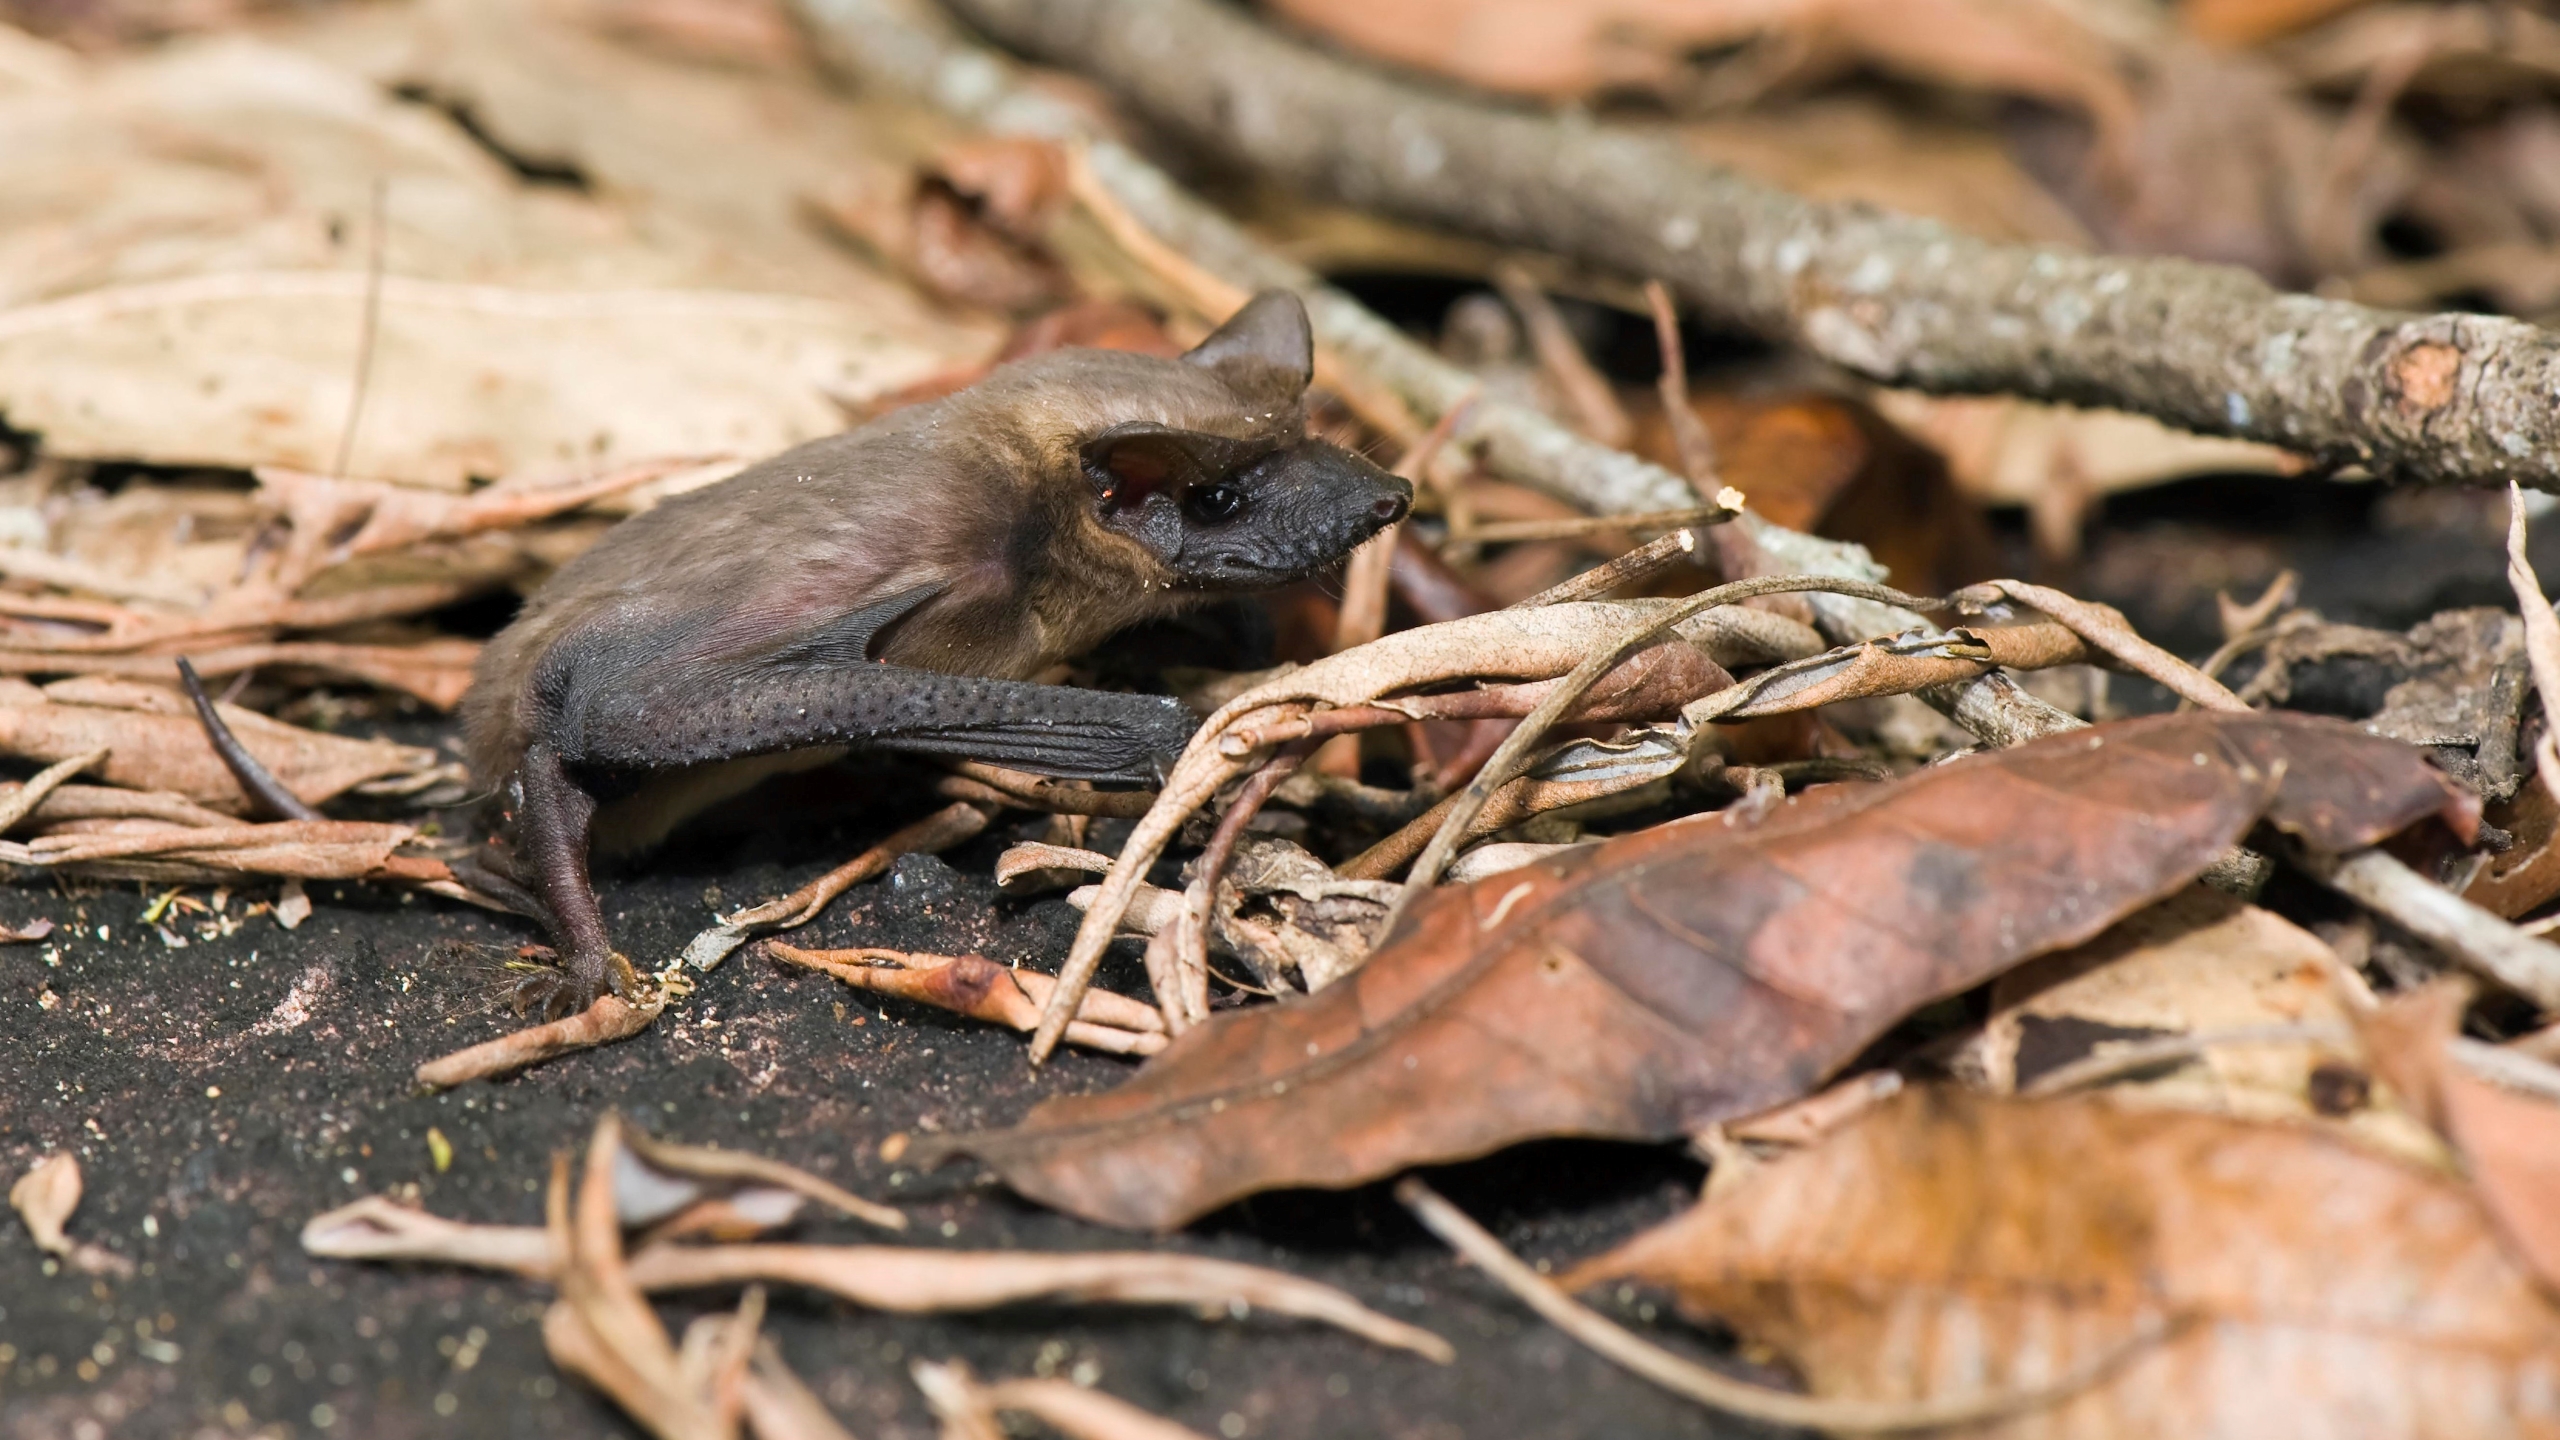 A photo of a Brazilian free-tailed bat (Tadarida brasiliensis) on the floor in Brazil.